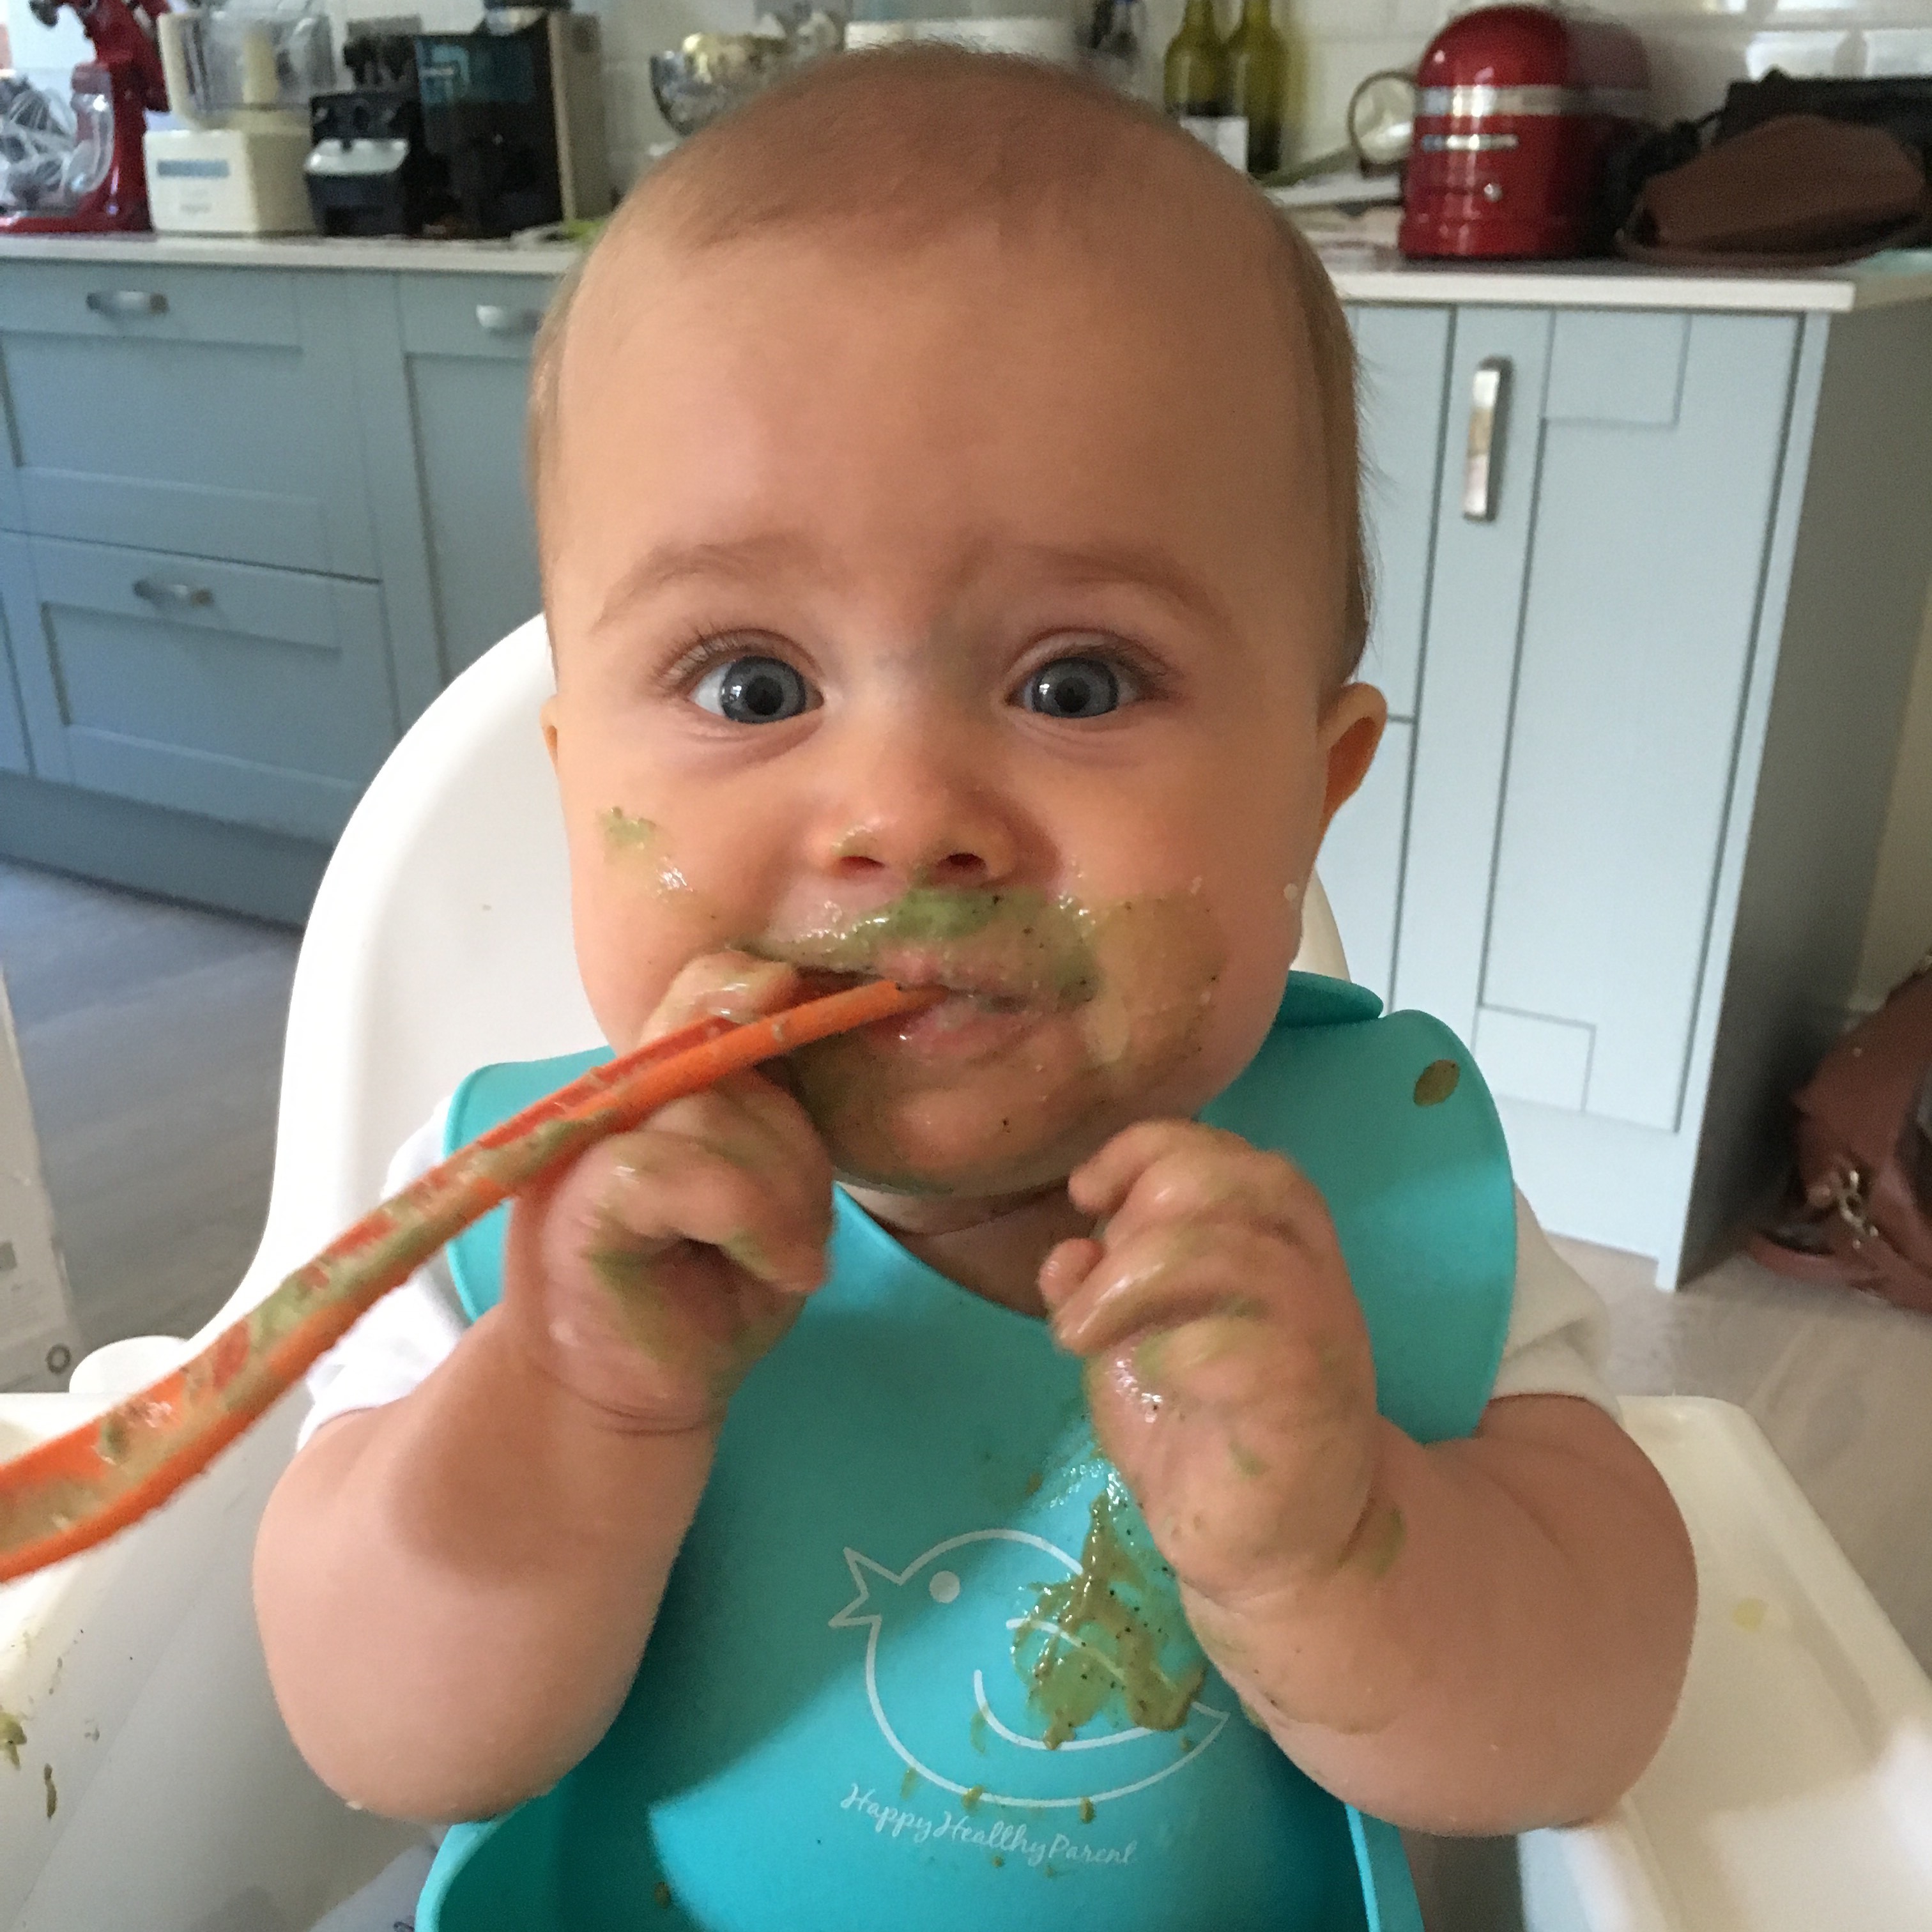 http://www.thelittleloaf.com/wp-content/uploads/2016/09/Baby-weaning-1.jpg